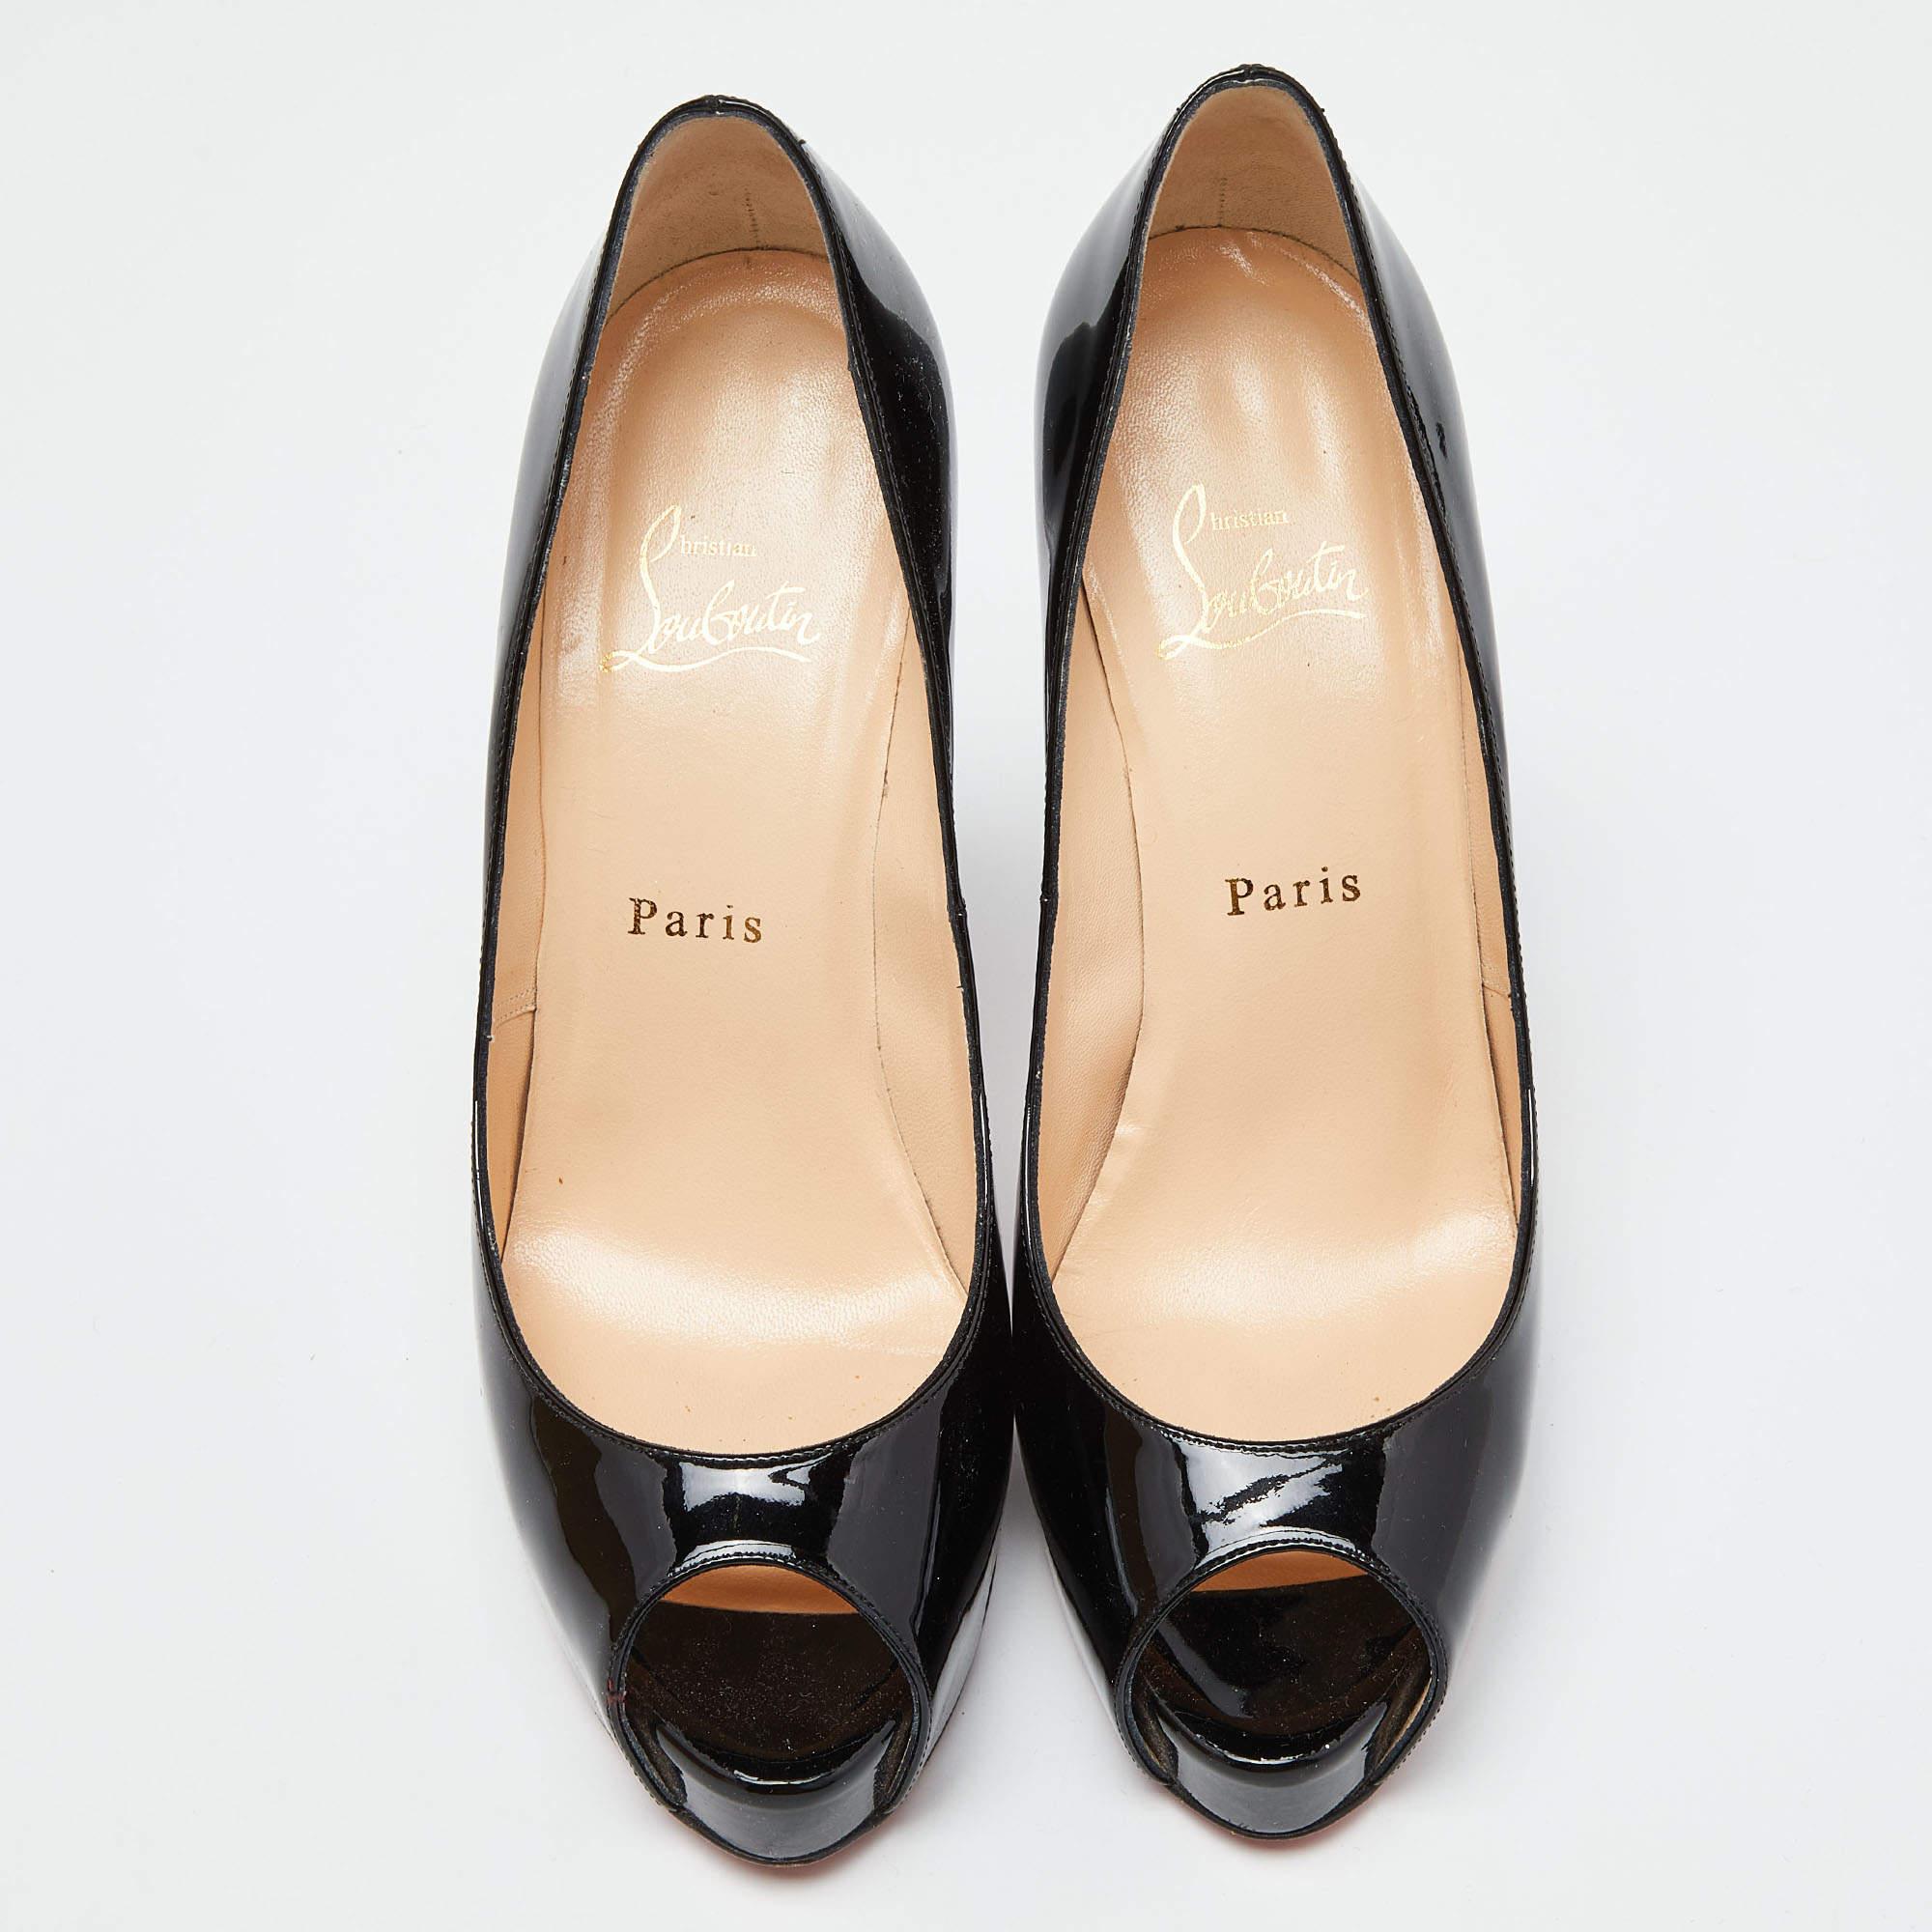 Those stylish outfits will look a lot more appealing with these Vendome pumps from Christian Louboutin. They have been crafted from black patent leather into a peep-toe silhouette. They are made comfortable with leather-lined insoles and elevated on